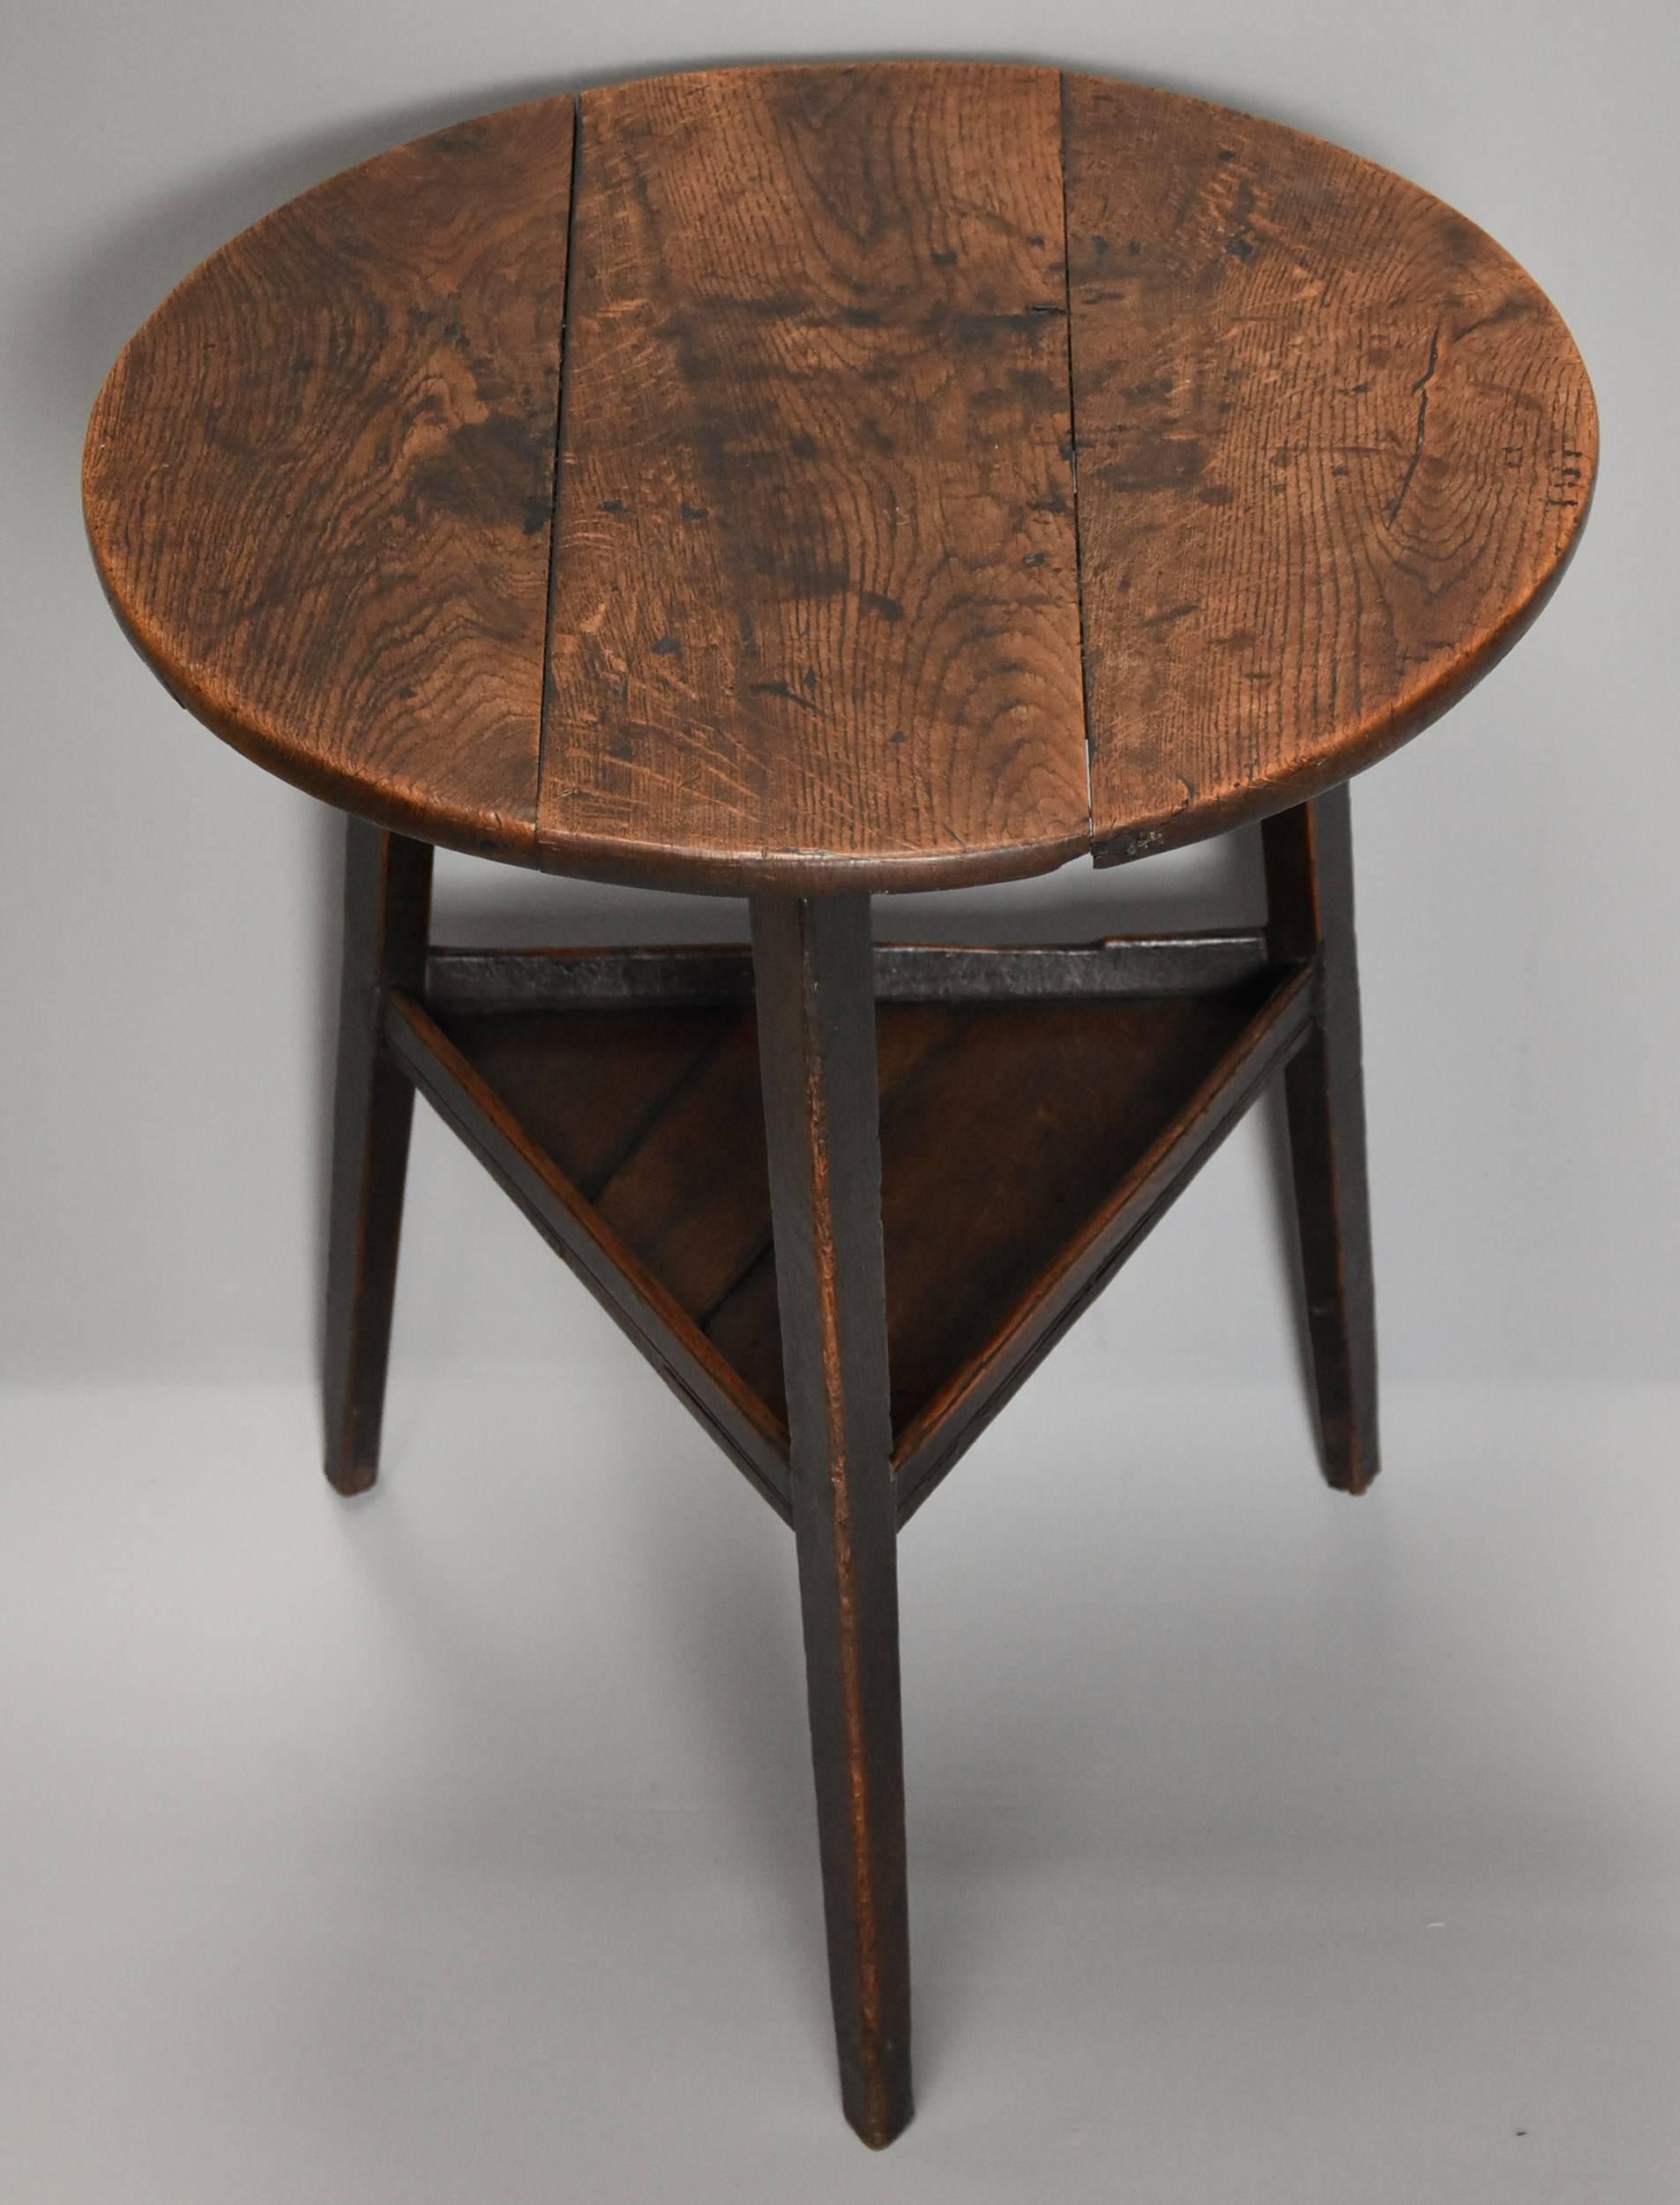 A superb late 18th century oak cricket table (or tavern table) with shelf below and of fine patina (color).

This table consists of an oak three plank top of fine patina, the top having an iron bracket below, this being an old repair.

The table